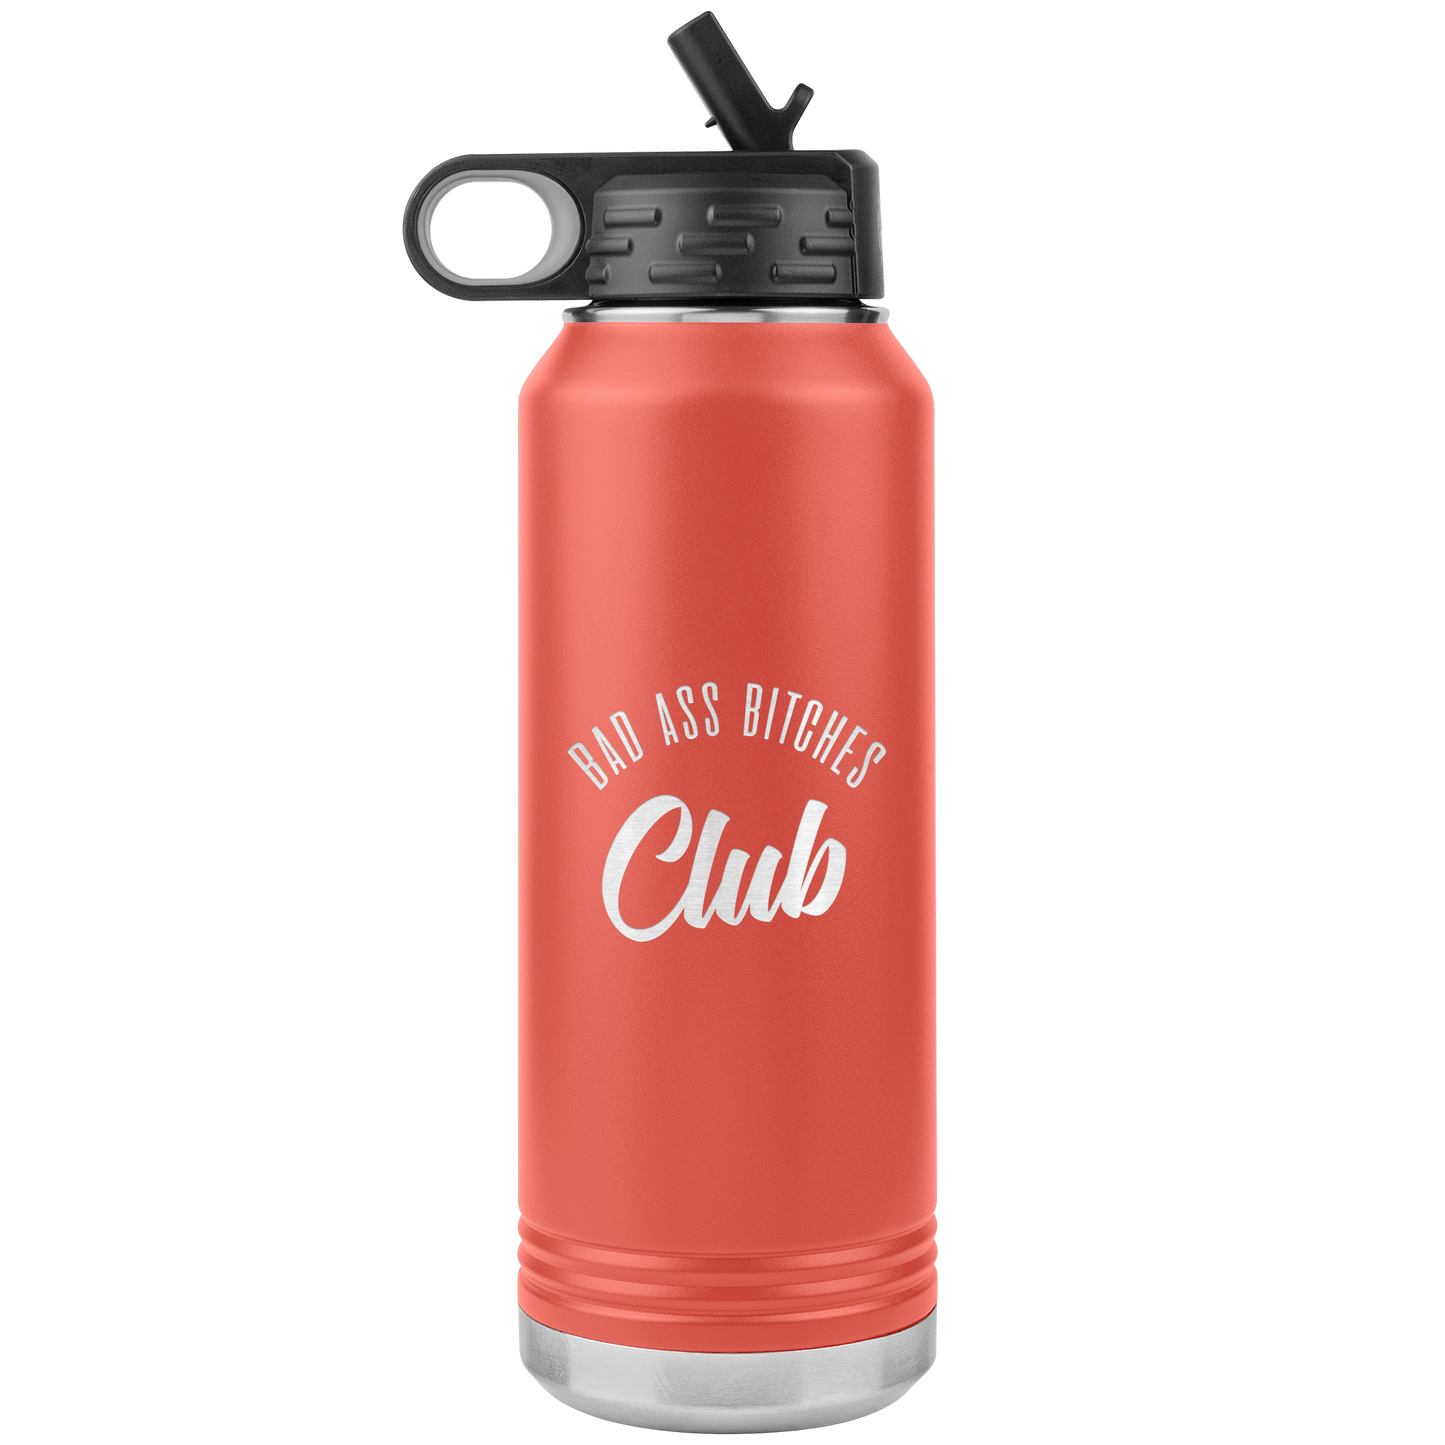 BAD ASS BITCHES CLUB 32 OZ WATER BOTTLE